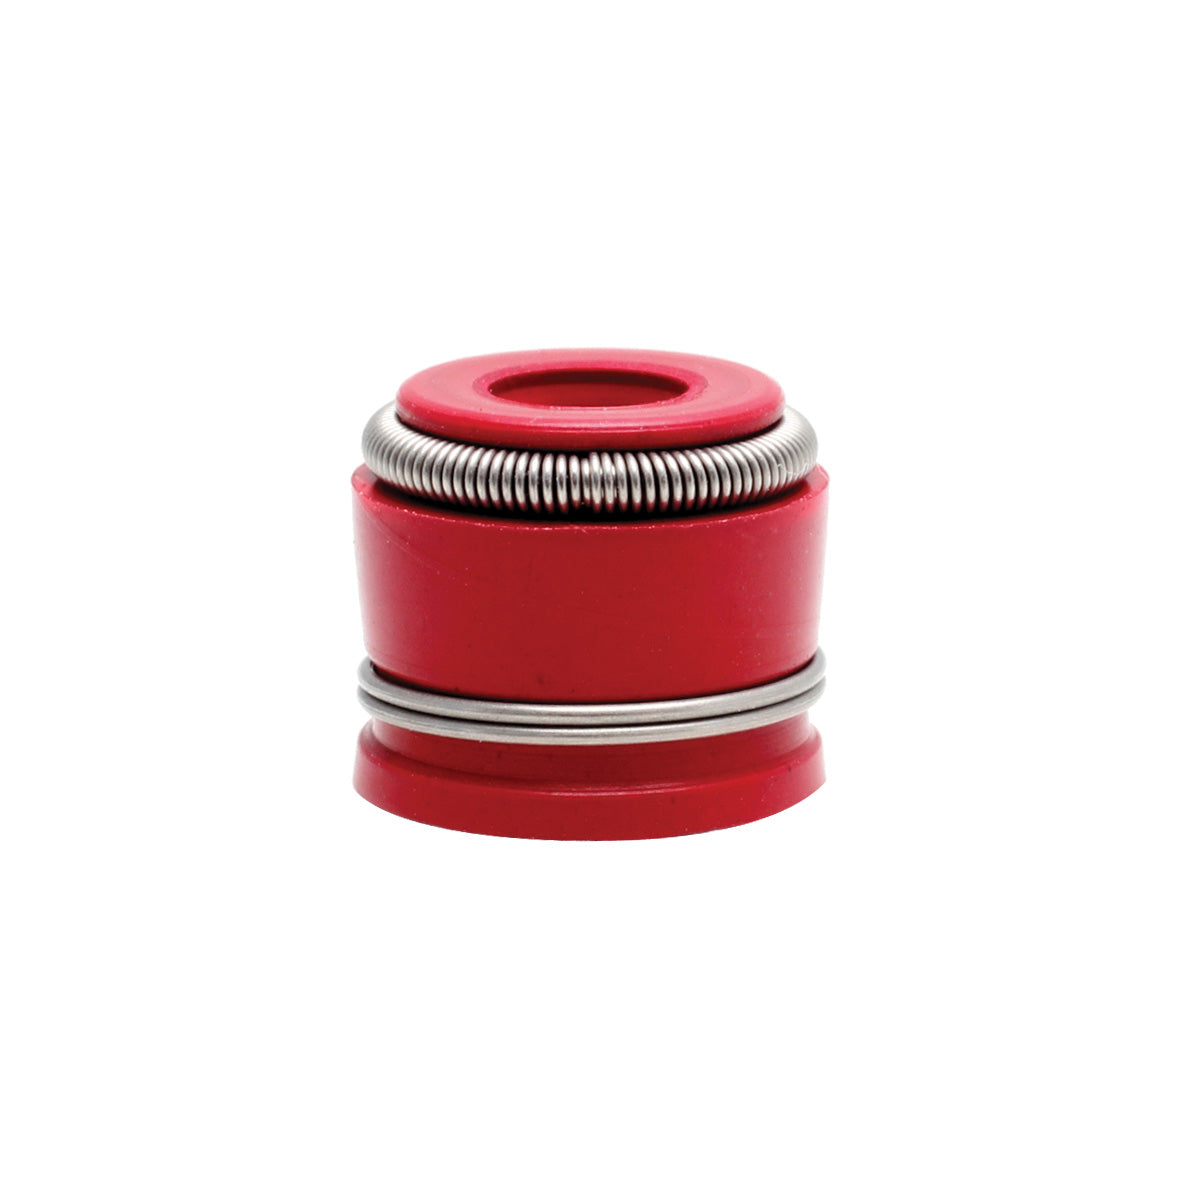 Seal, Red Viton, 5.5mm Stem x 0.360" Guide Seal Detail, Various Applications